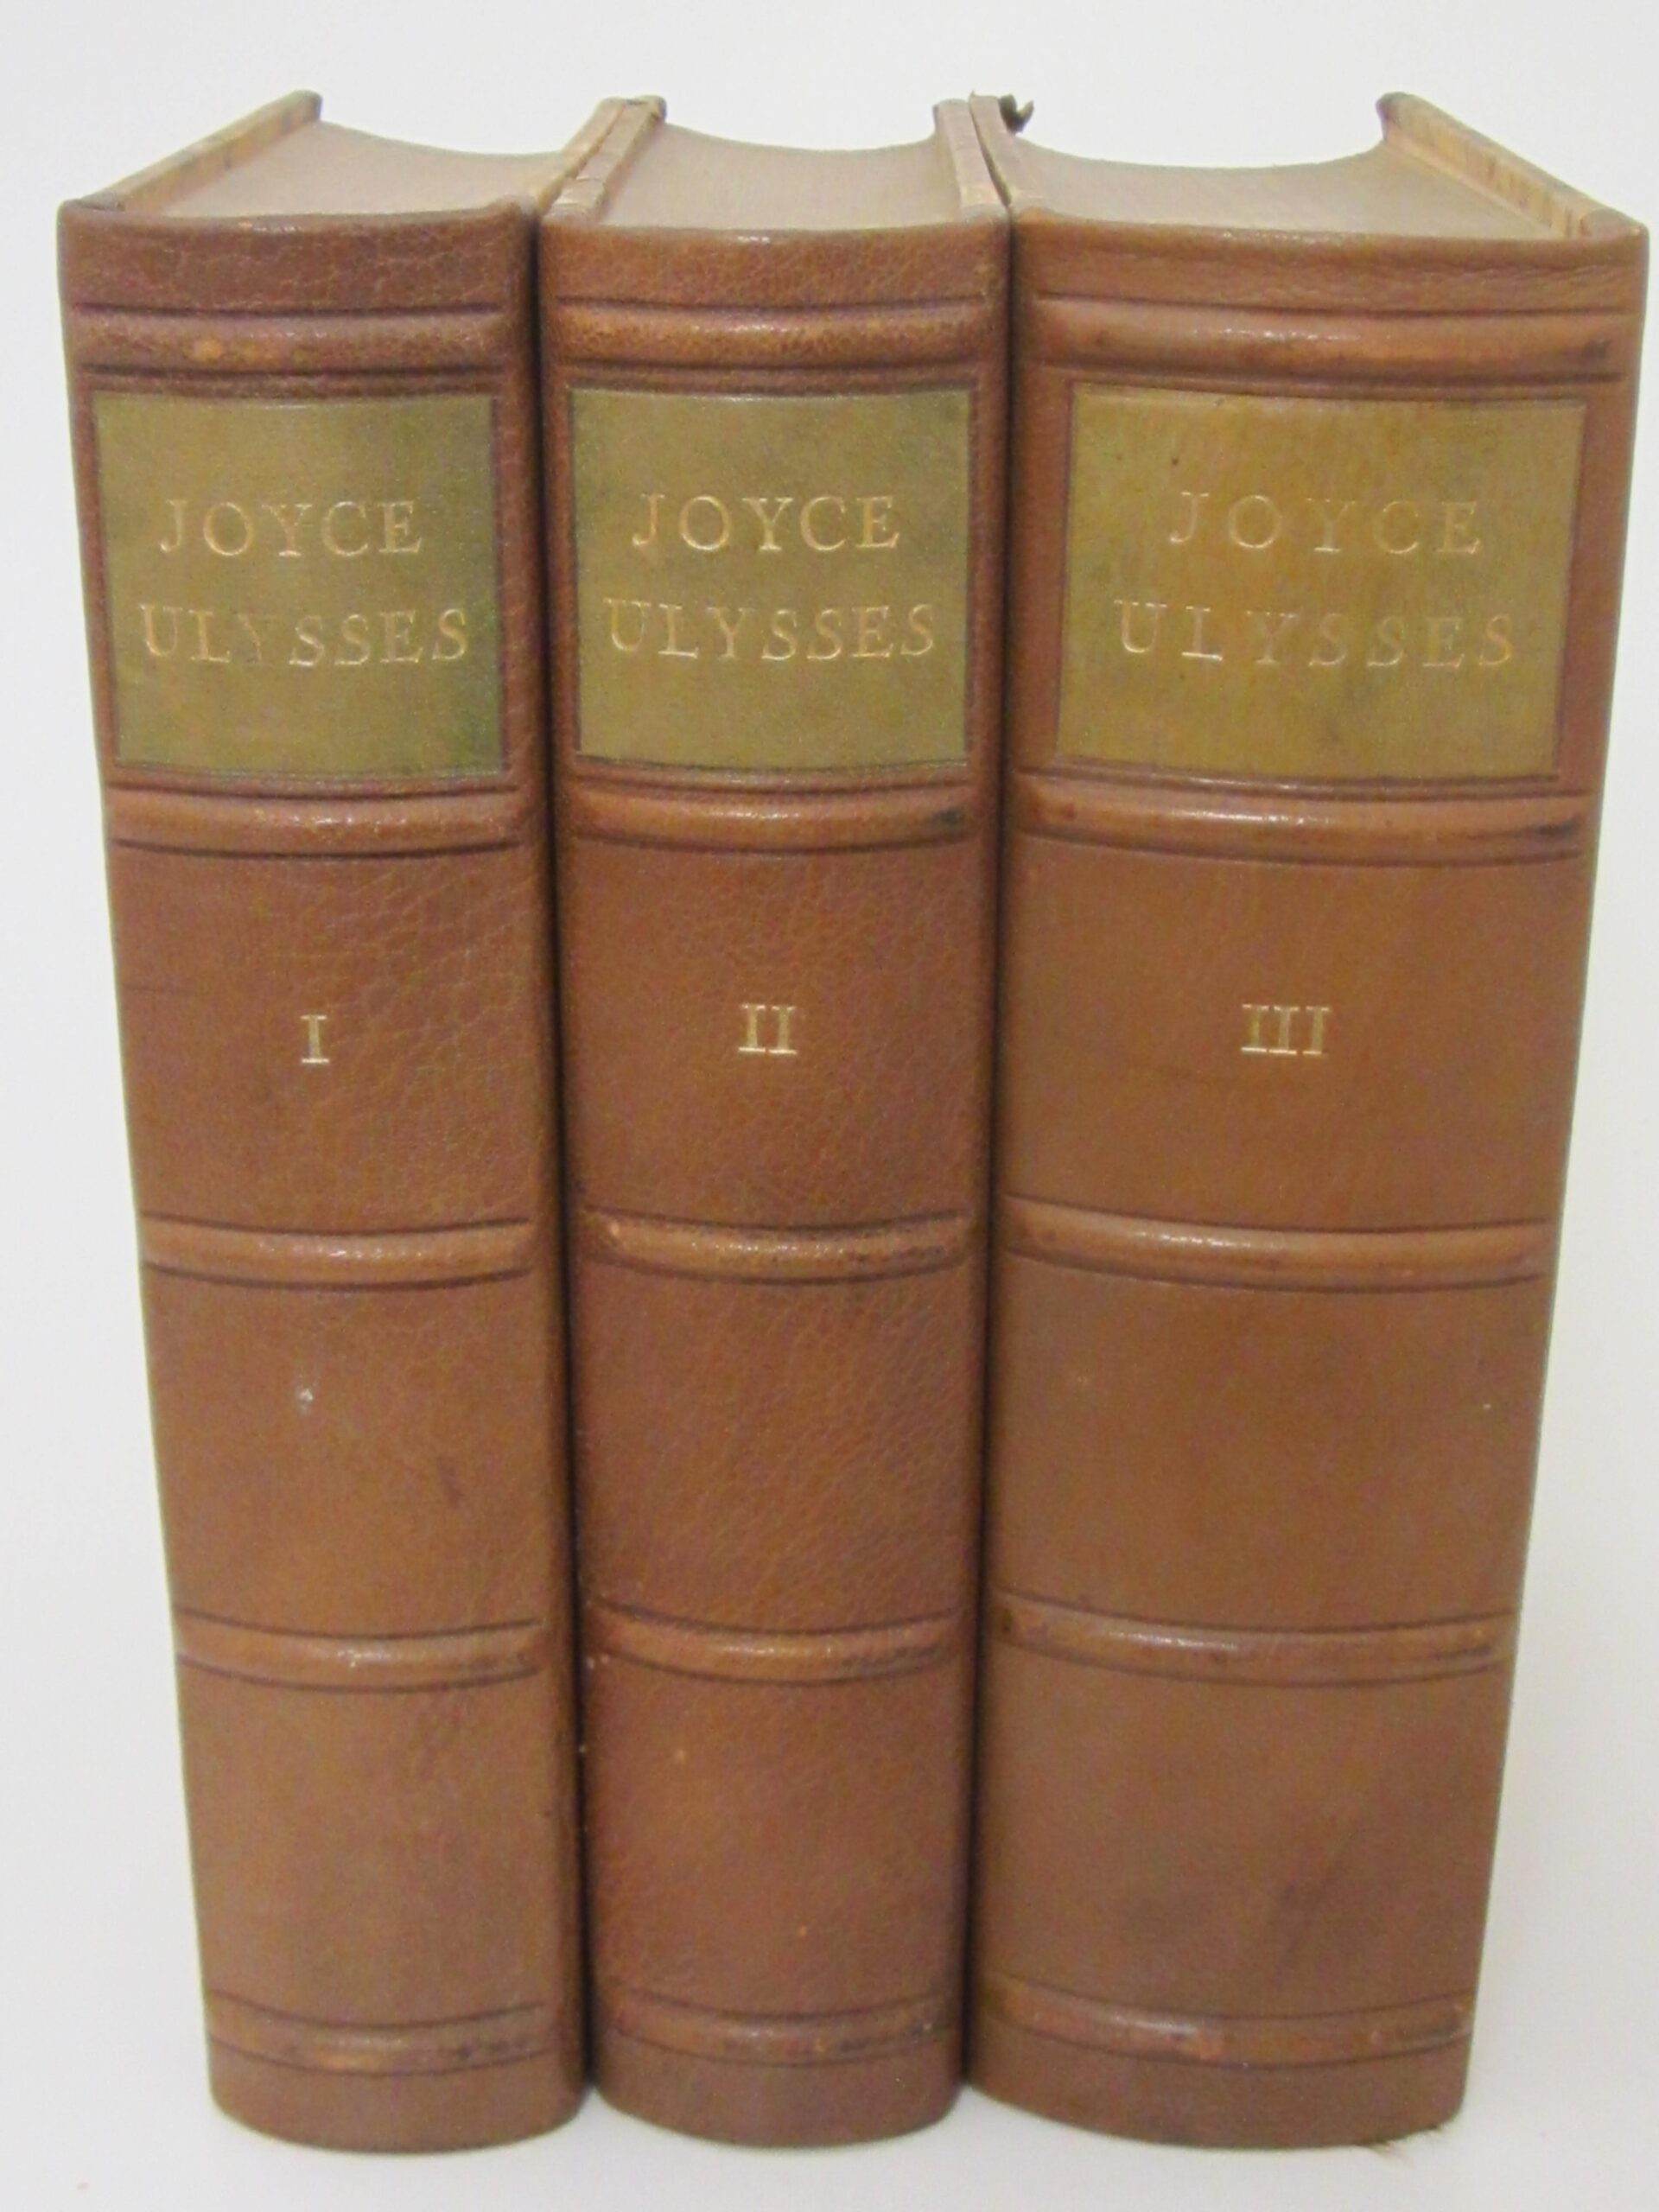 Ulysses. First Translated Edition (1927) by James Joyce